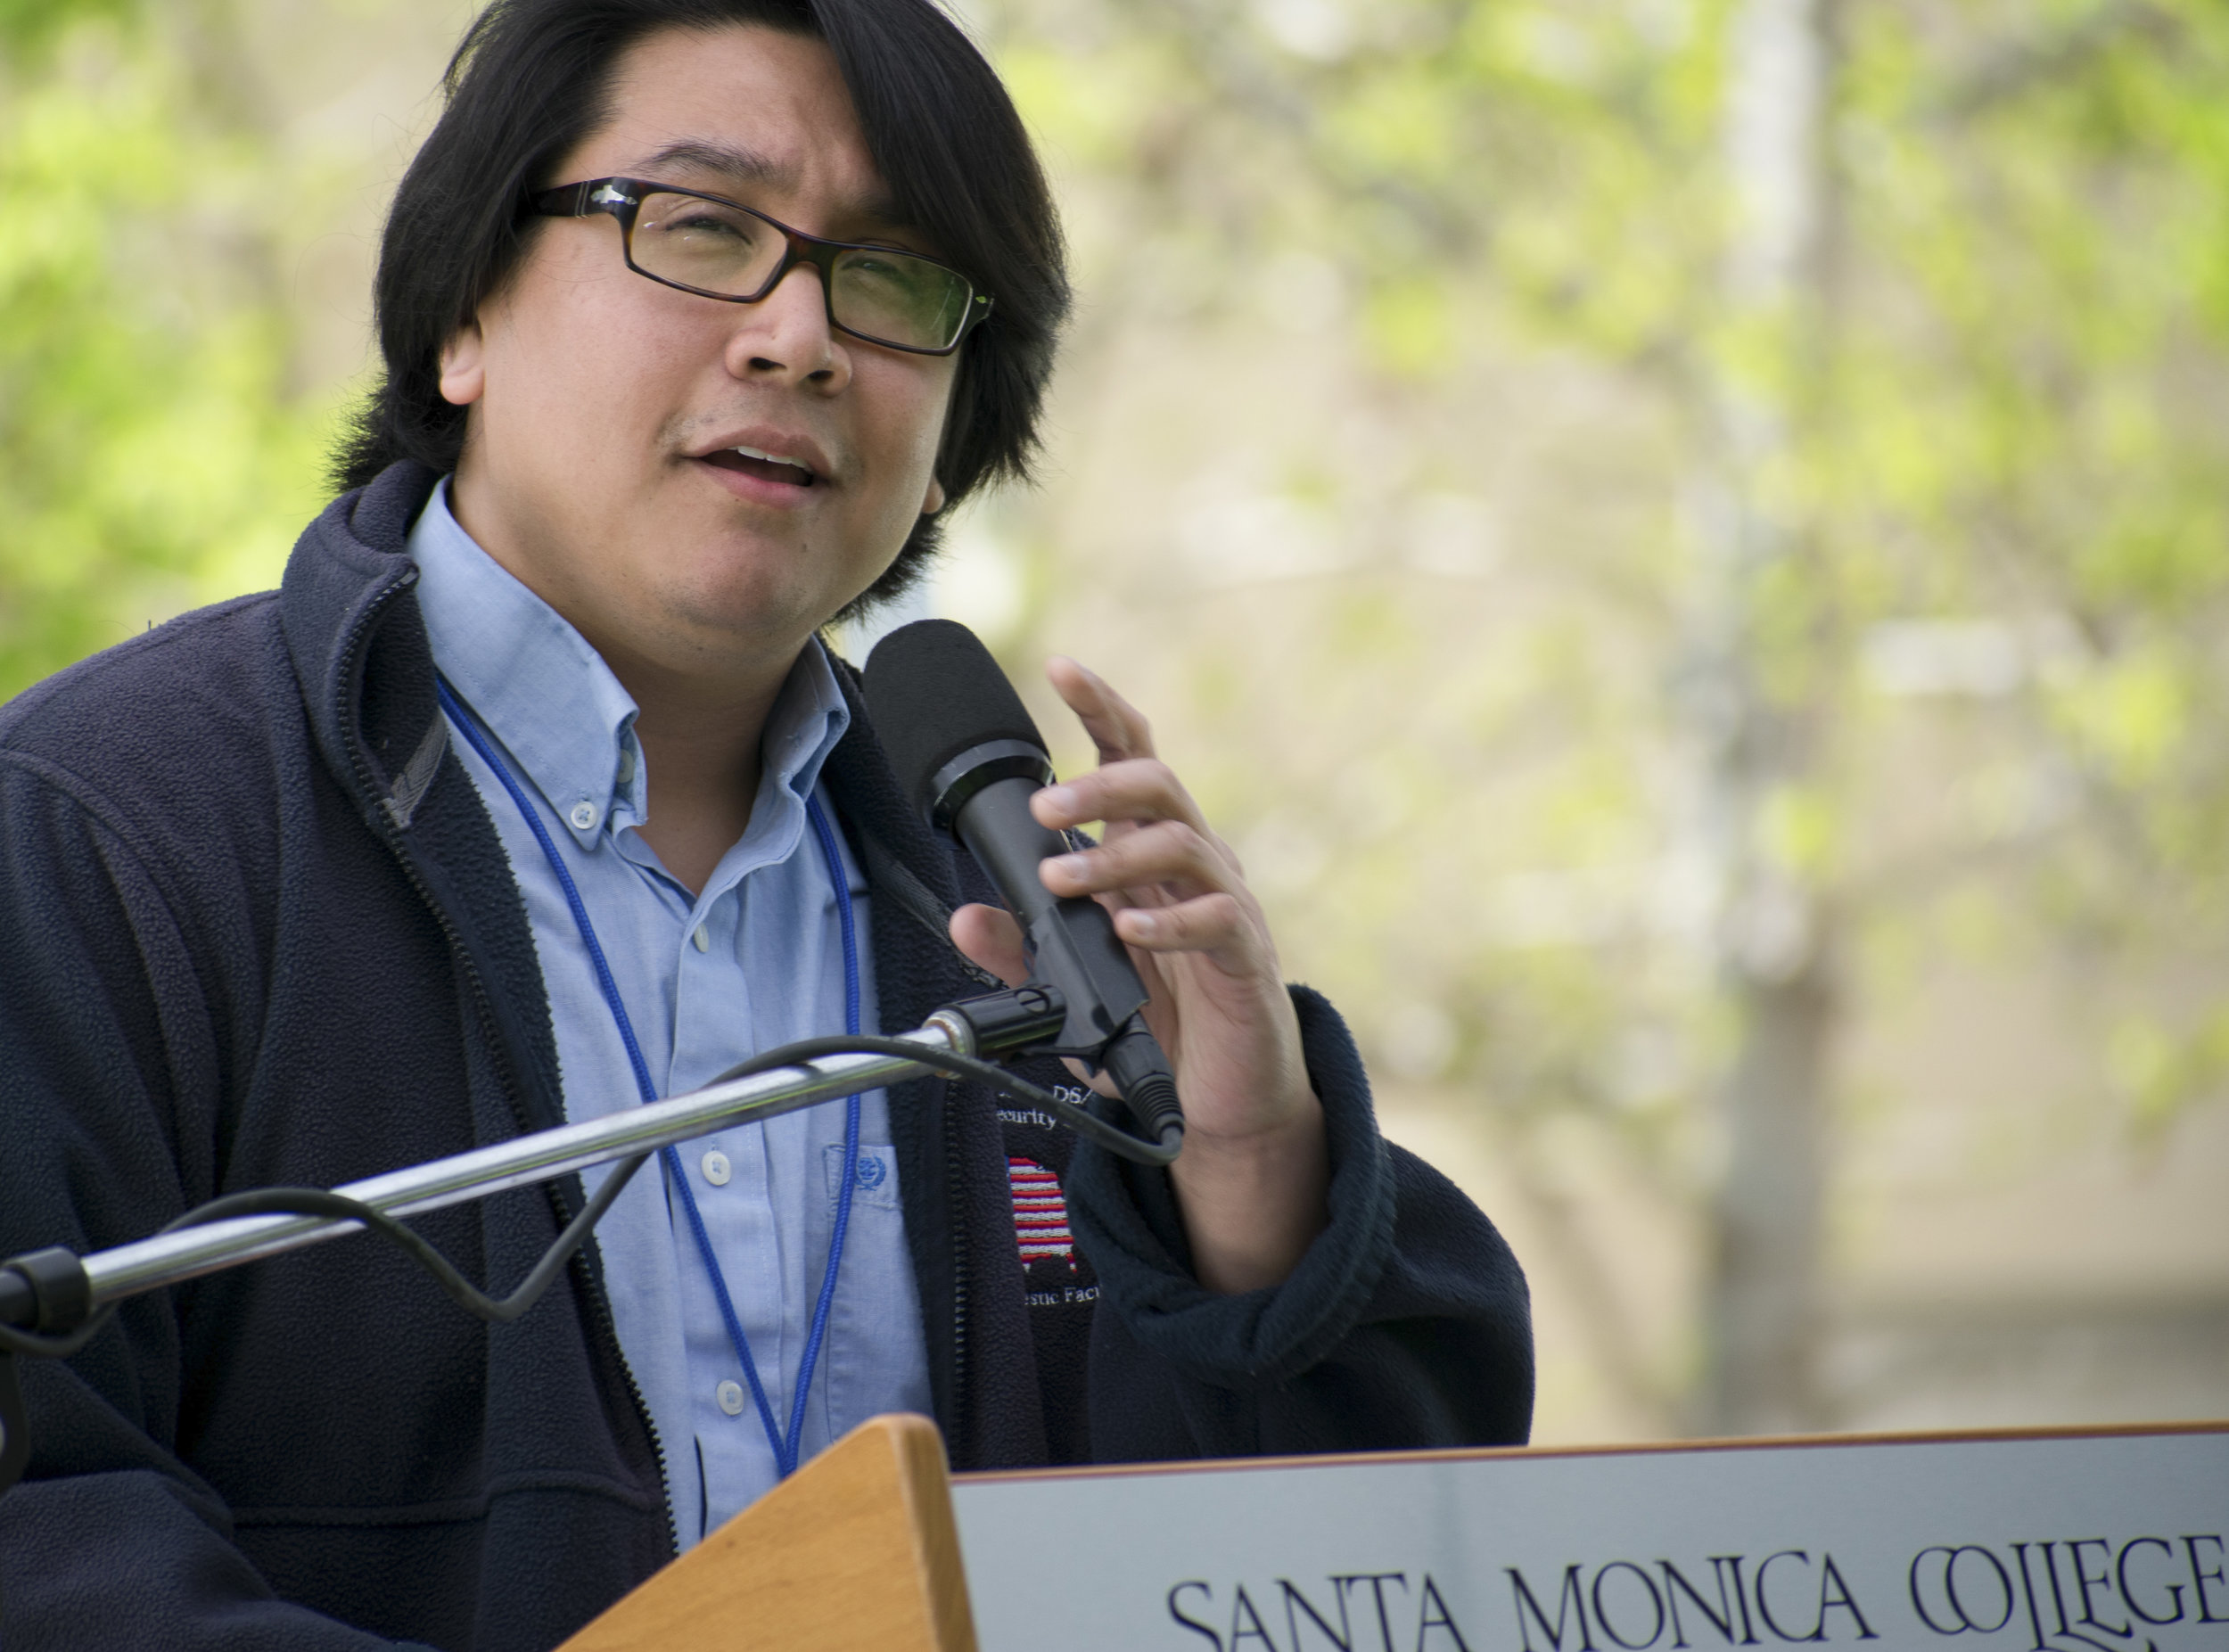  Arthur Sanchez, a candidate for the position of student advocacy on the Associated Students of Santa Monica College board introduces himself during a forum to give candidates running for the election a platform on April 3 in Santa Monica, California